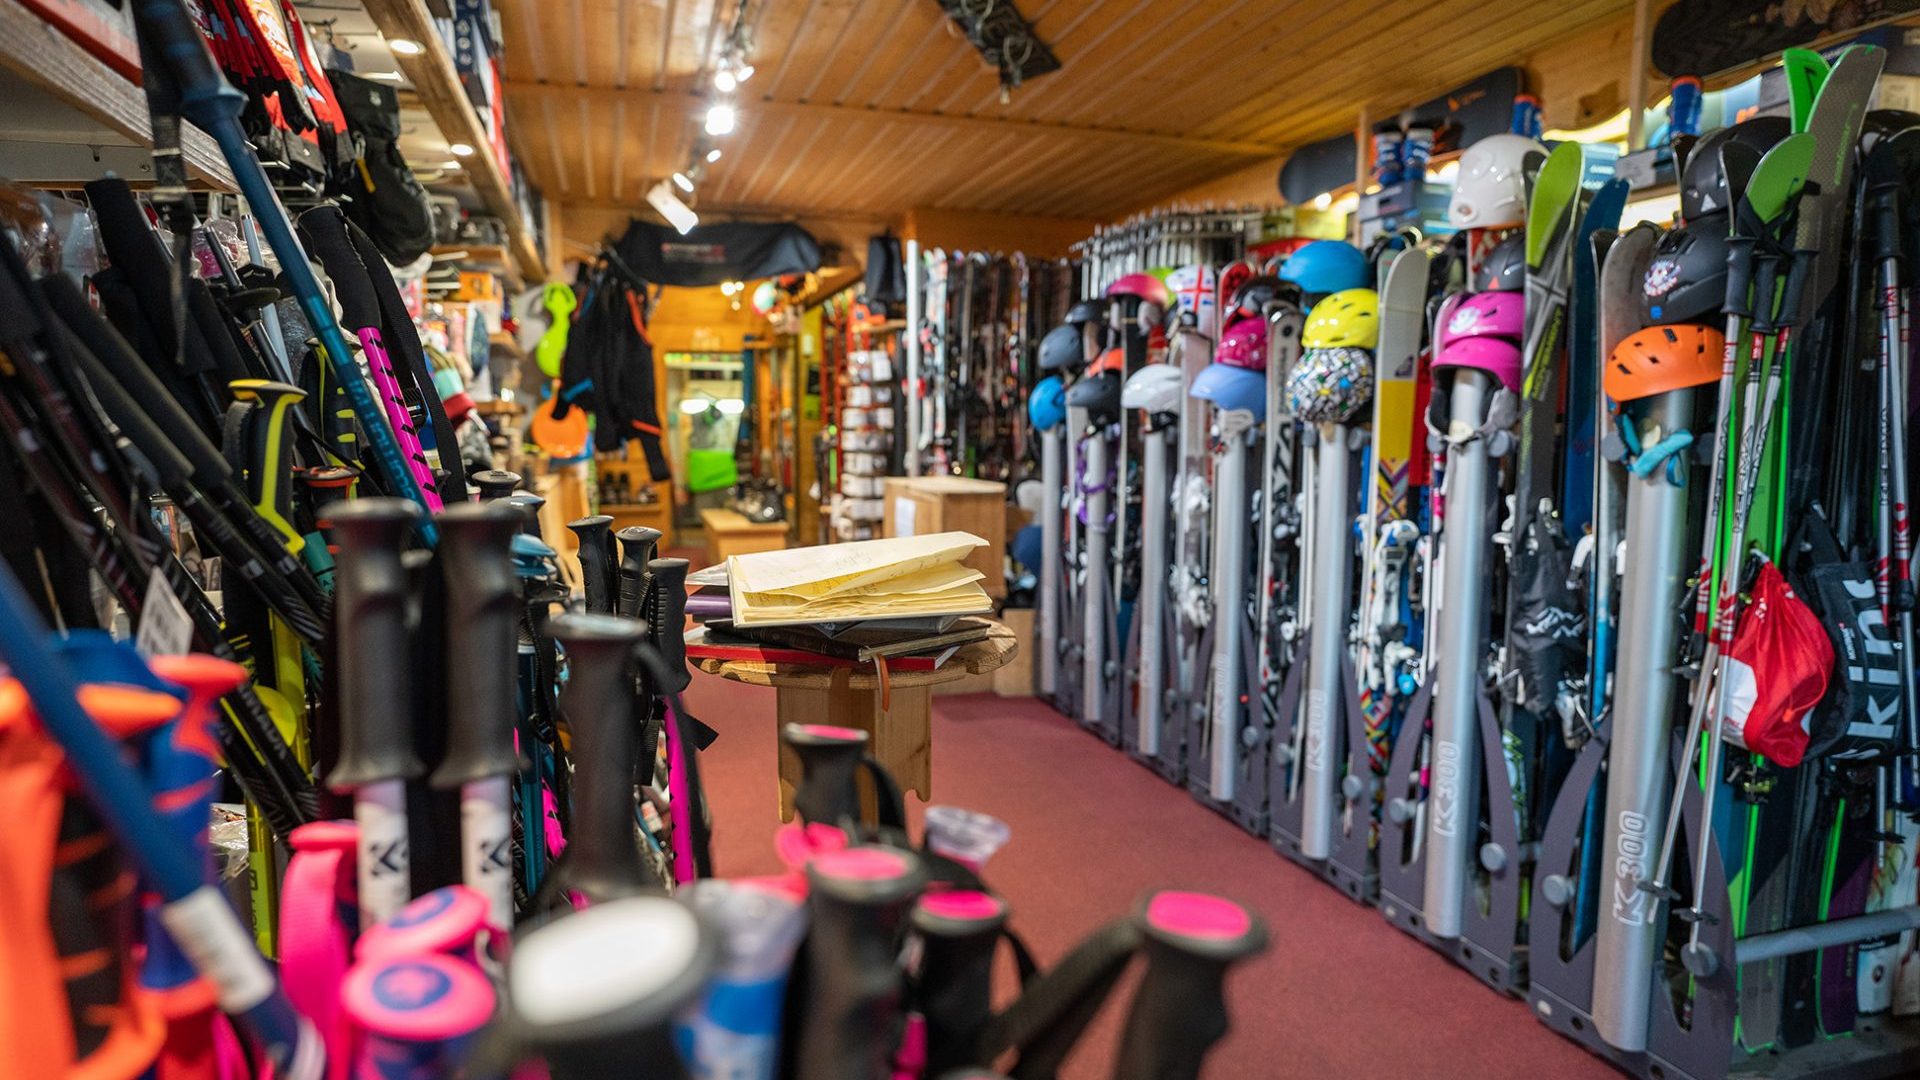 Skis and poles: equipment rental